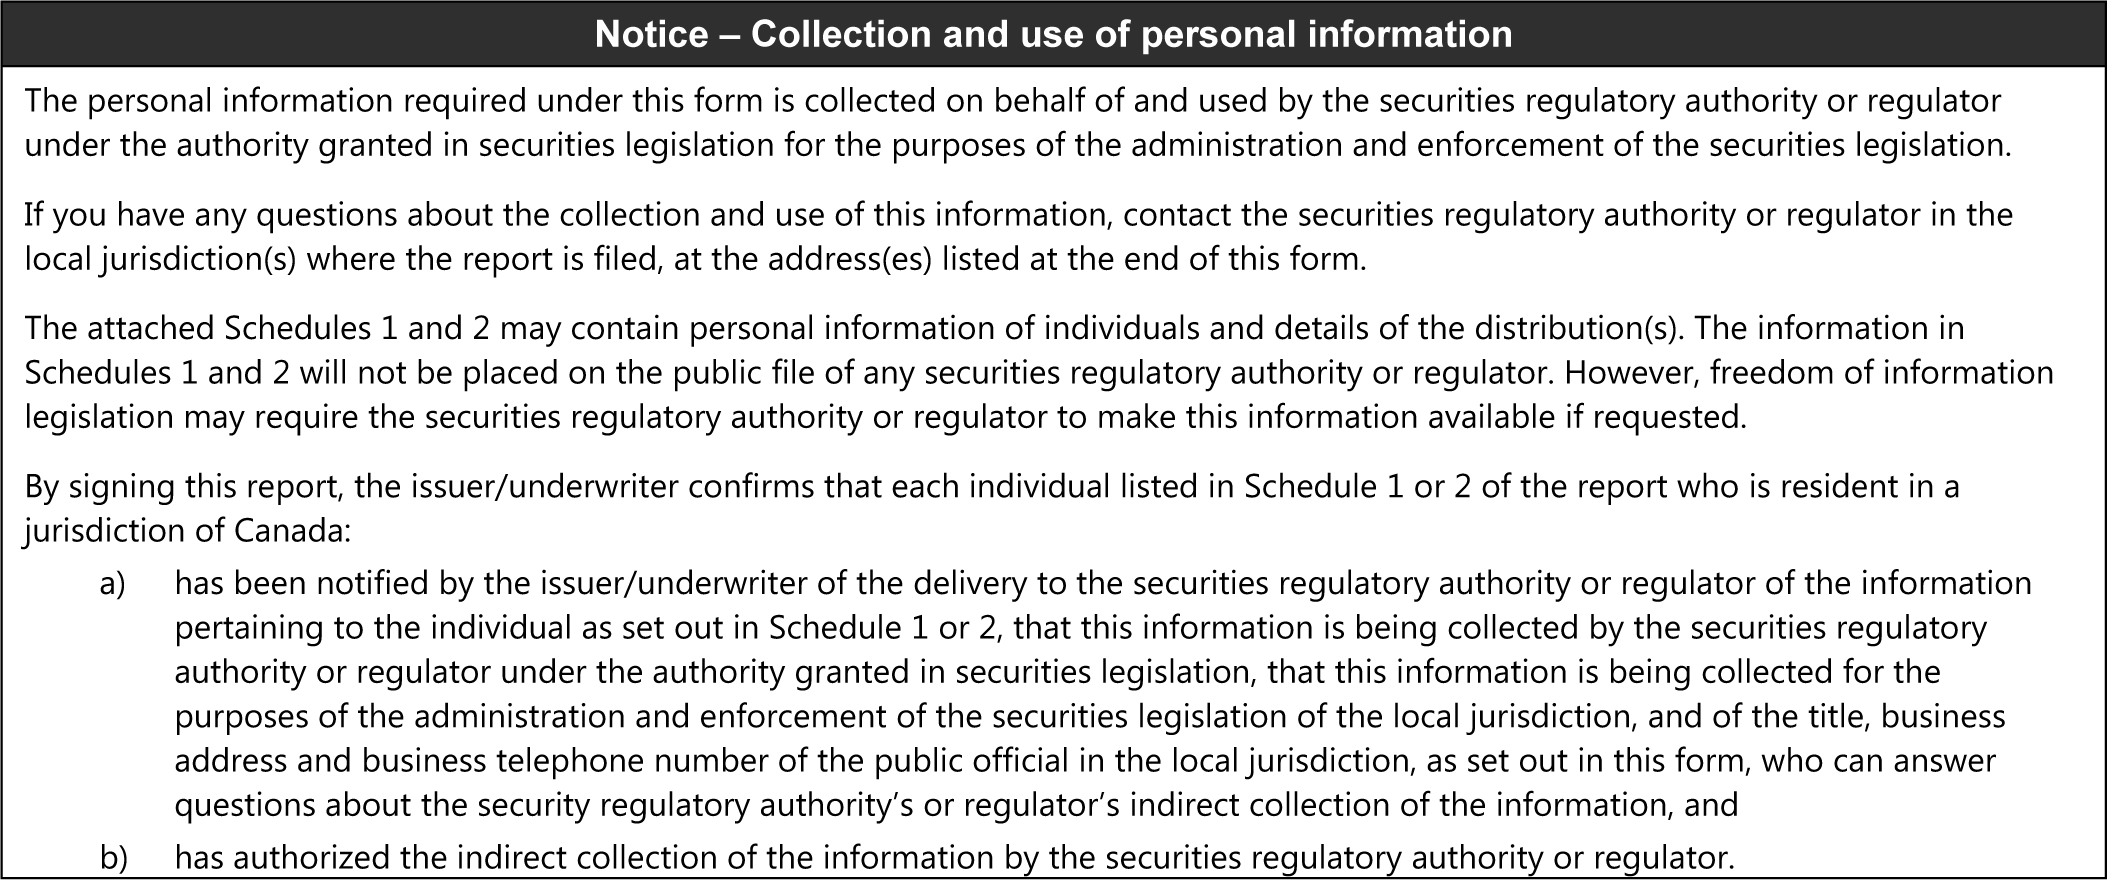 Notice - Collection and use of personal information